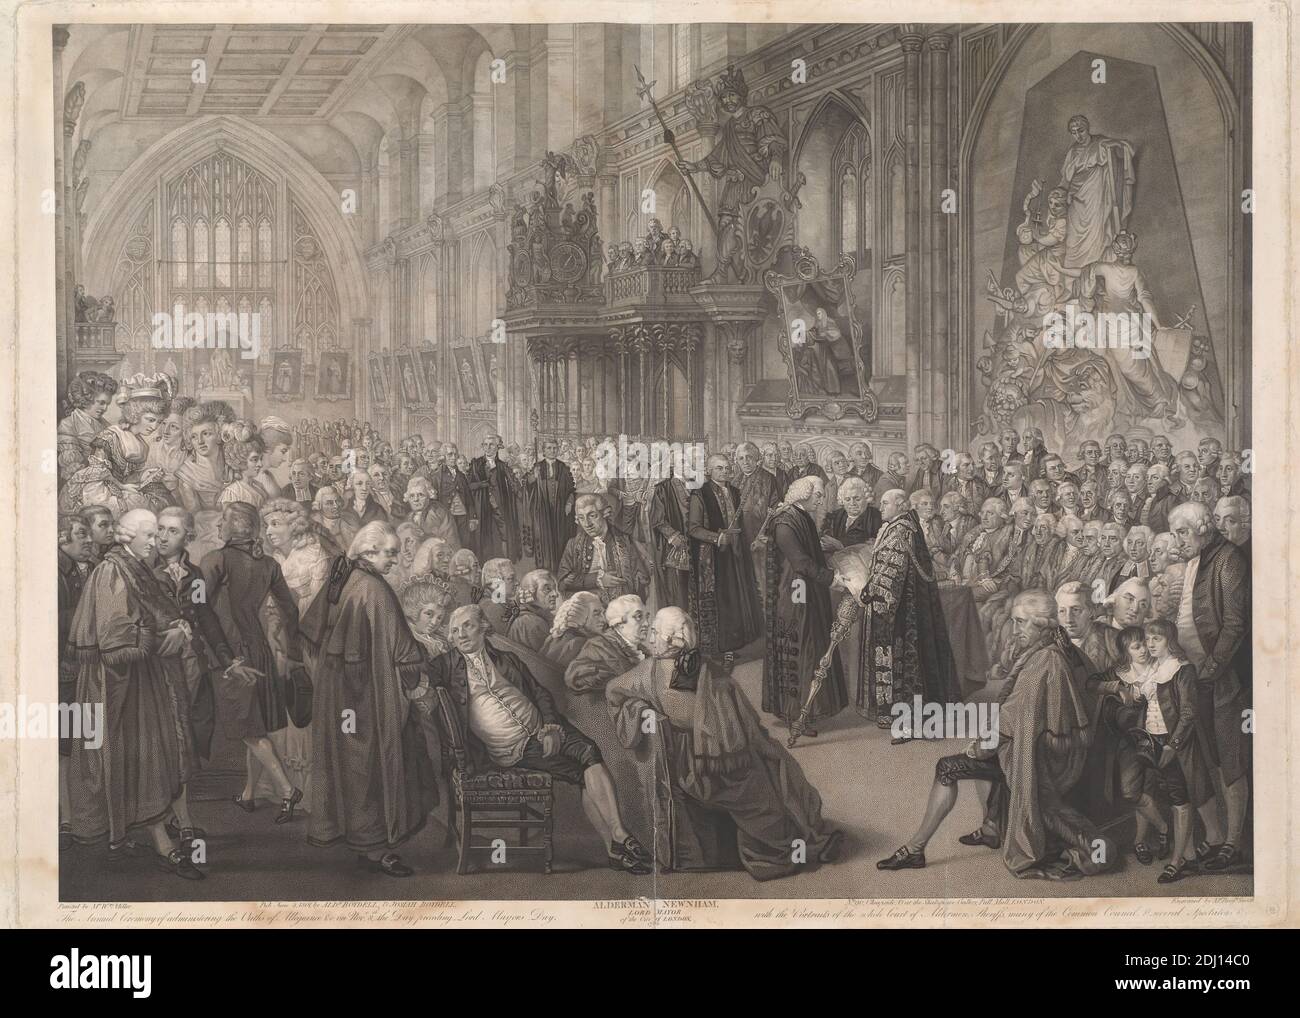 Annual Ceremony of adminishing the Oaths of Allegiance and Church on November 8th, the Day proceeding Lord Mayors Day, Benjamin Smith, 1775–1833, British, after William Miller, 1796–1882, British, 1801, Aquatint Stock Photo